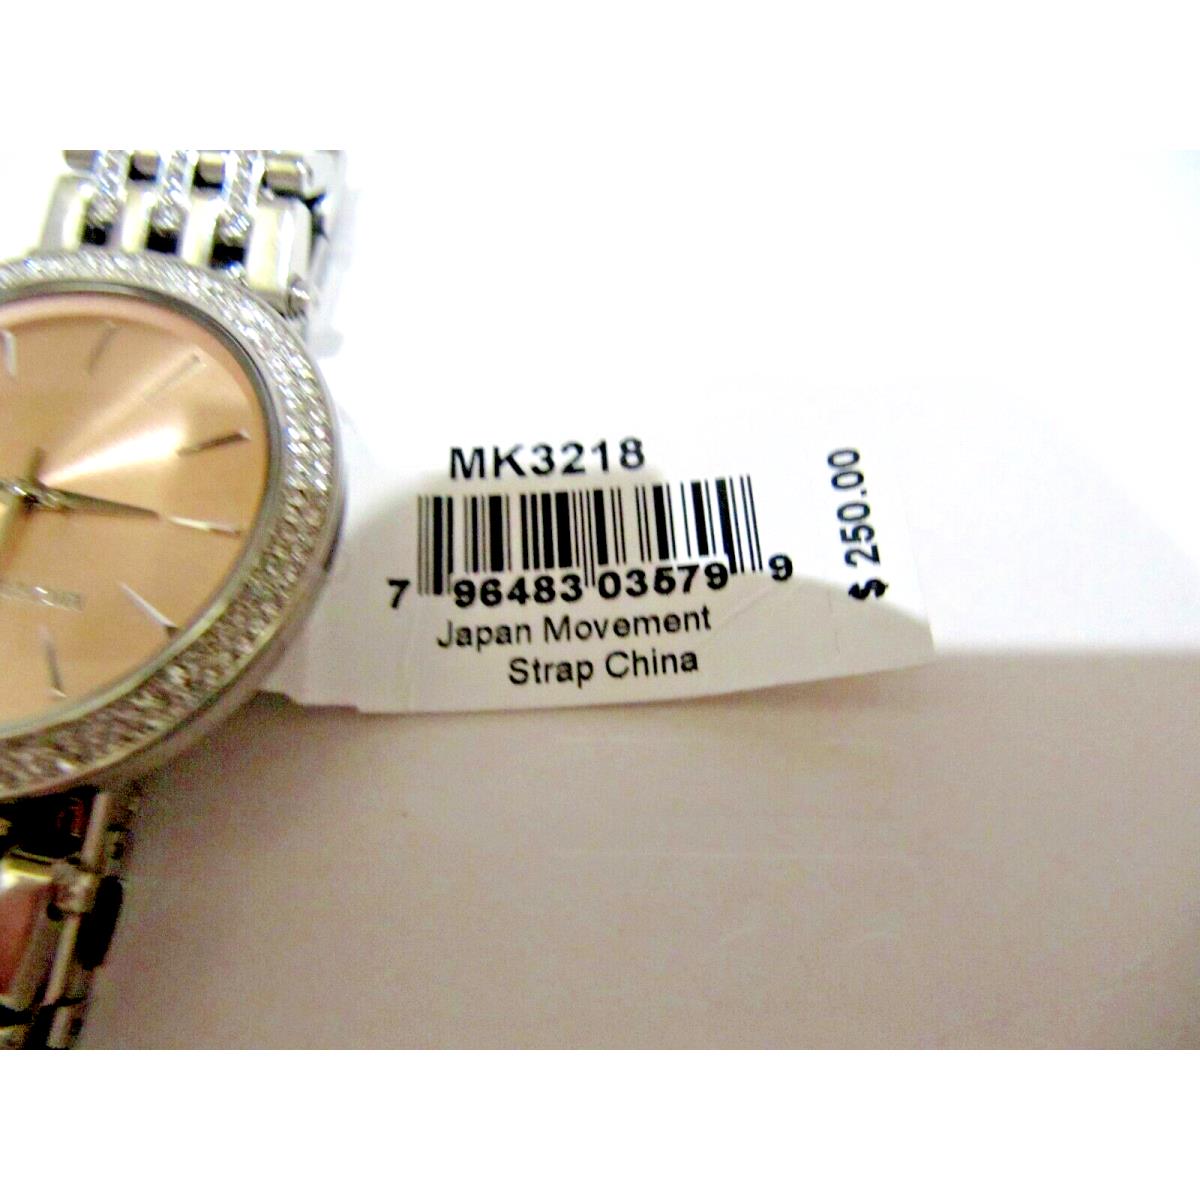 Michael Kors watch Darci - Pink Face, Pink Dial, Silver Band 5